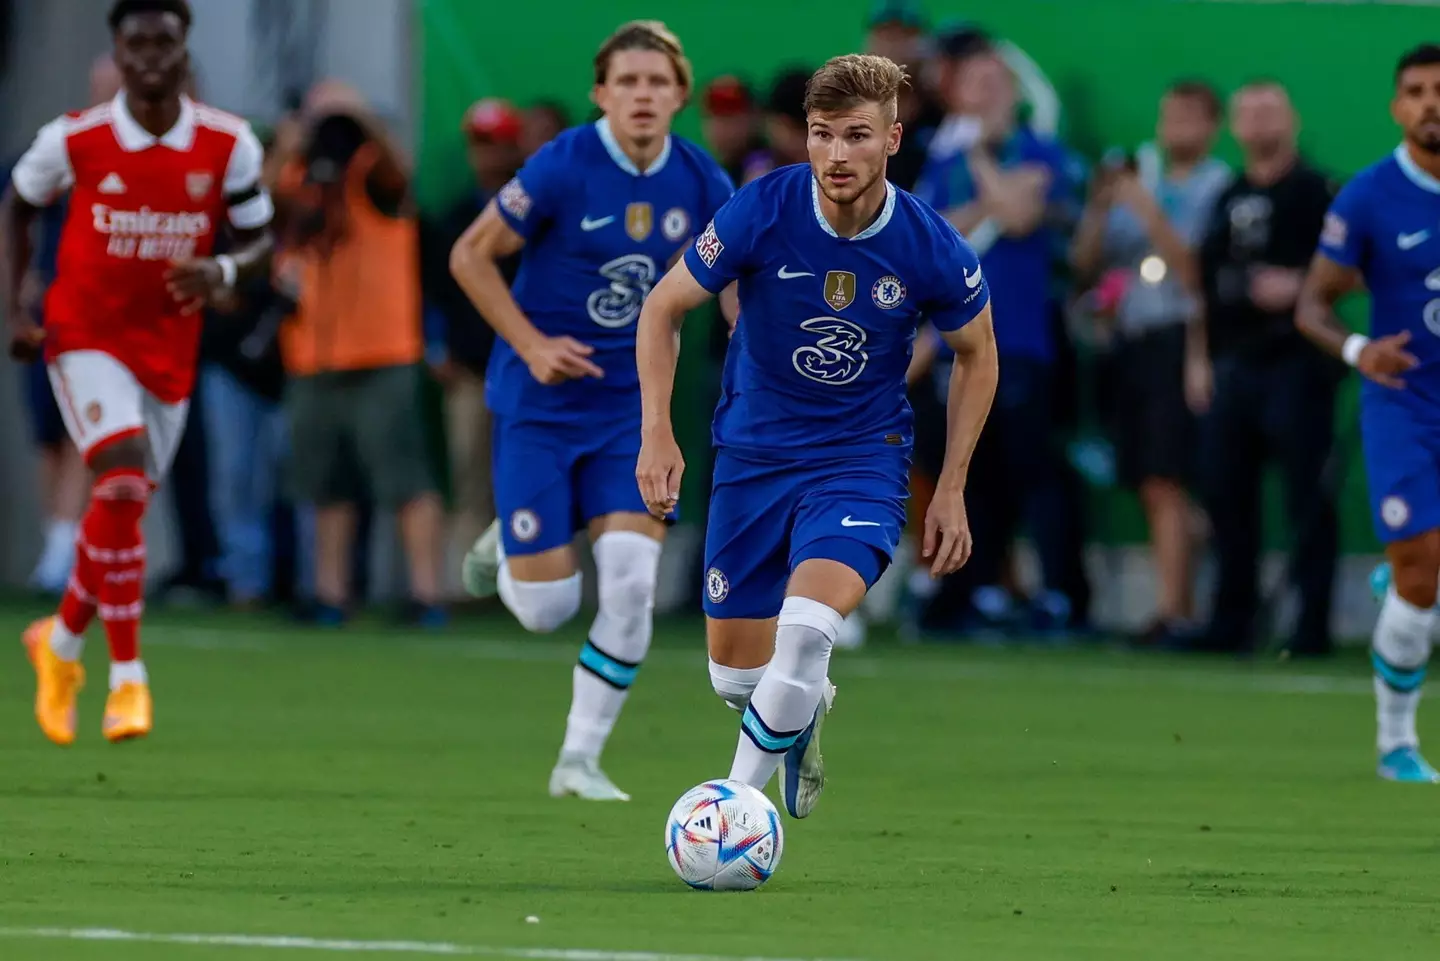 Chelsea forward Timo Werner (11) during the game between Chelsea and Arsenal on July 23, 2022 at Camping World Stadium in Orlando. (Alamy)